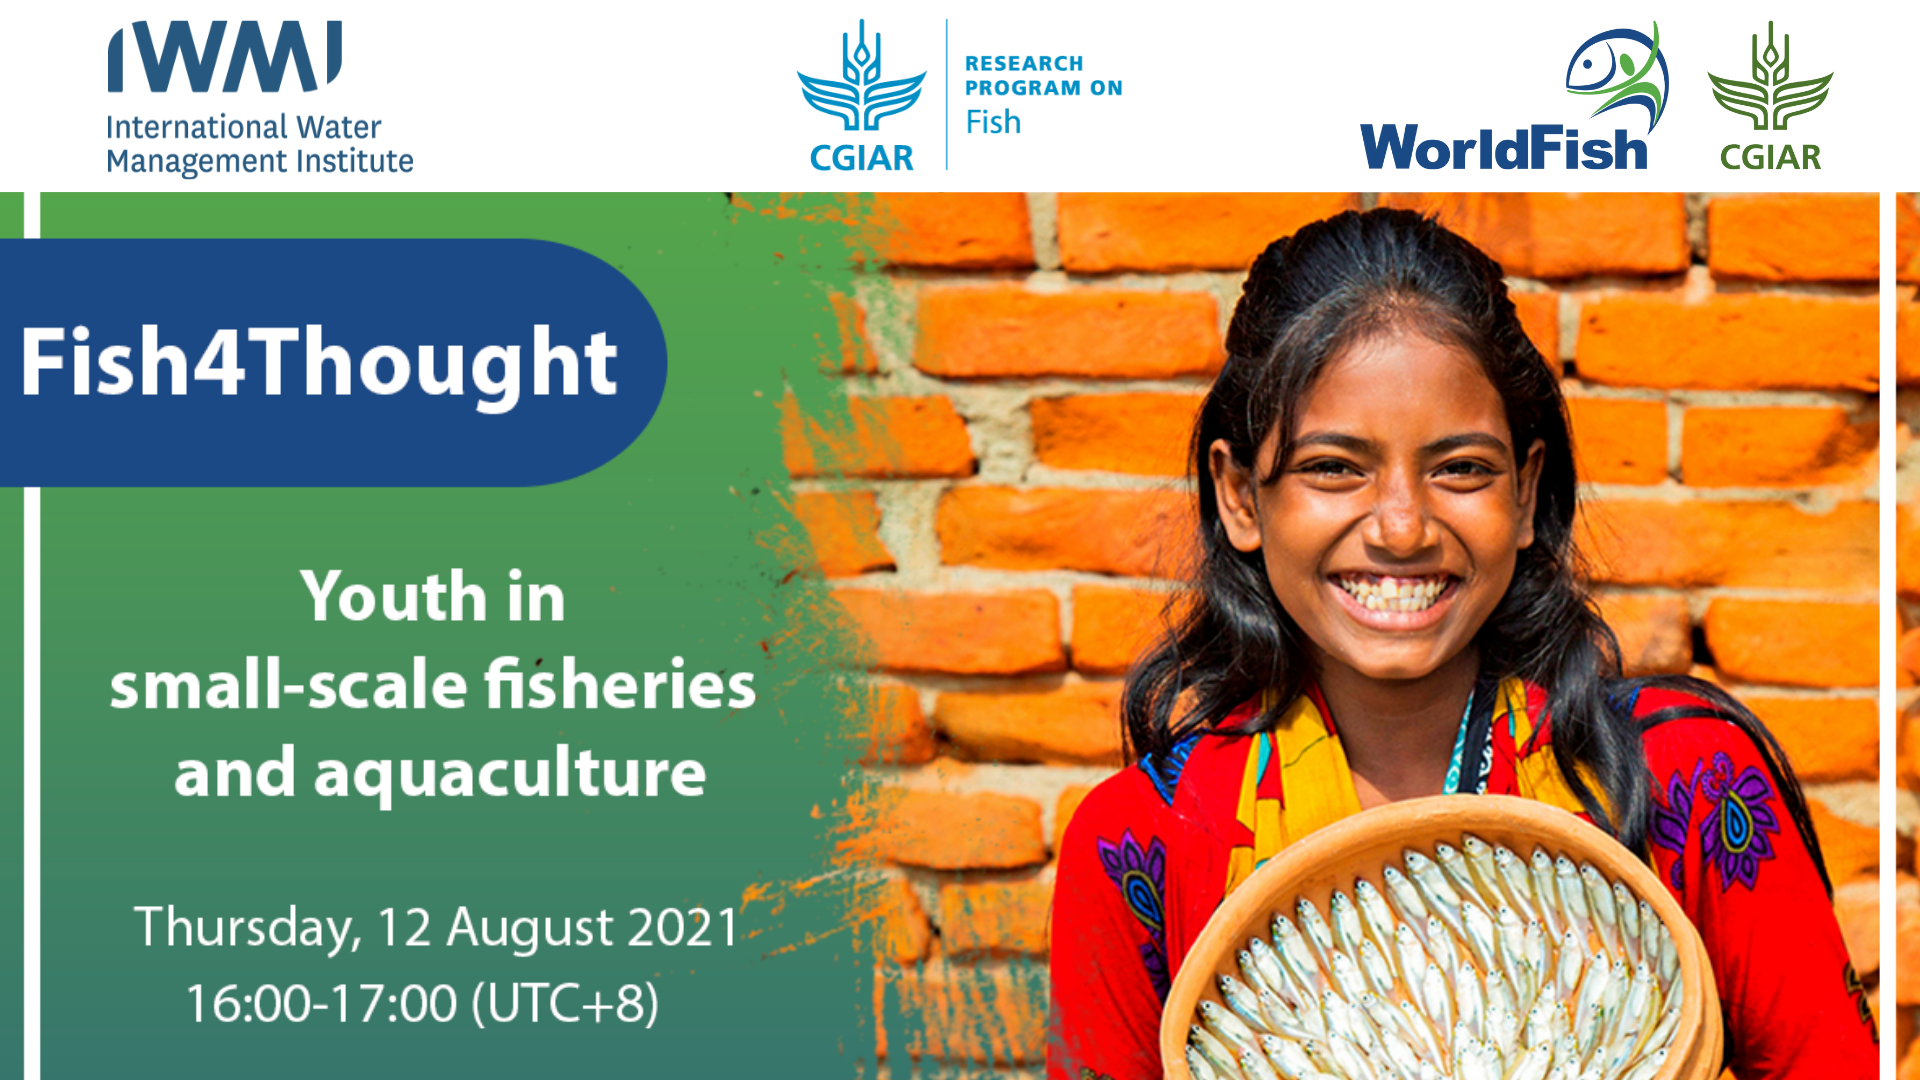 Fish4Thought: Youth in small-scale fisheries and aquaculture